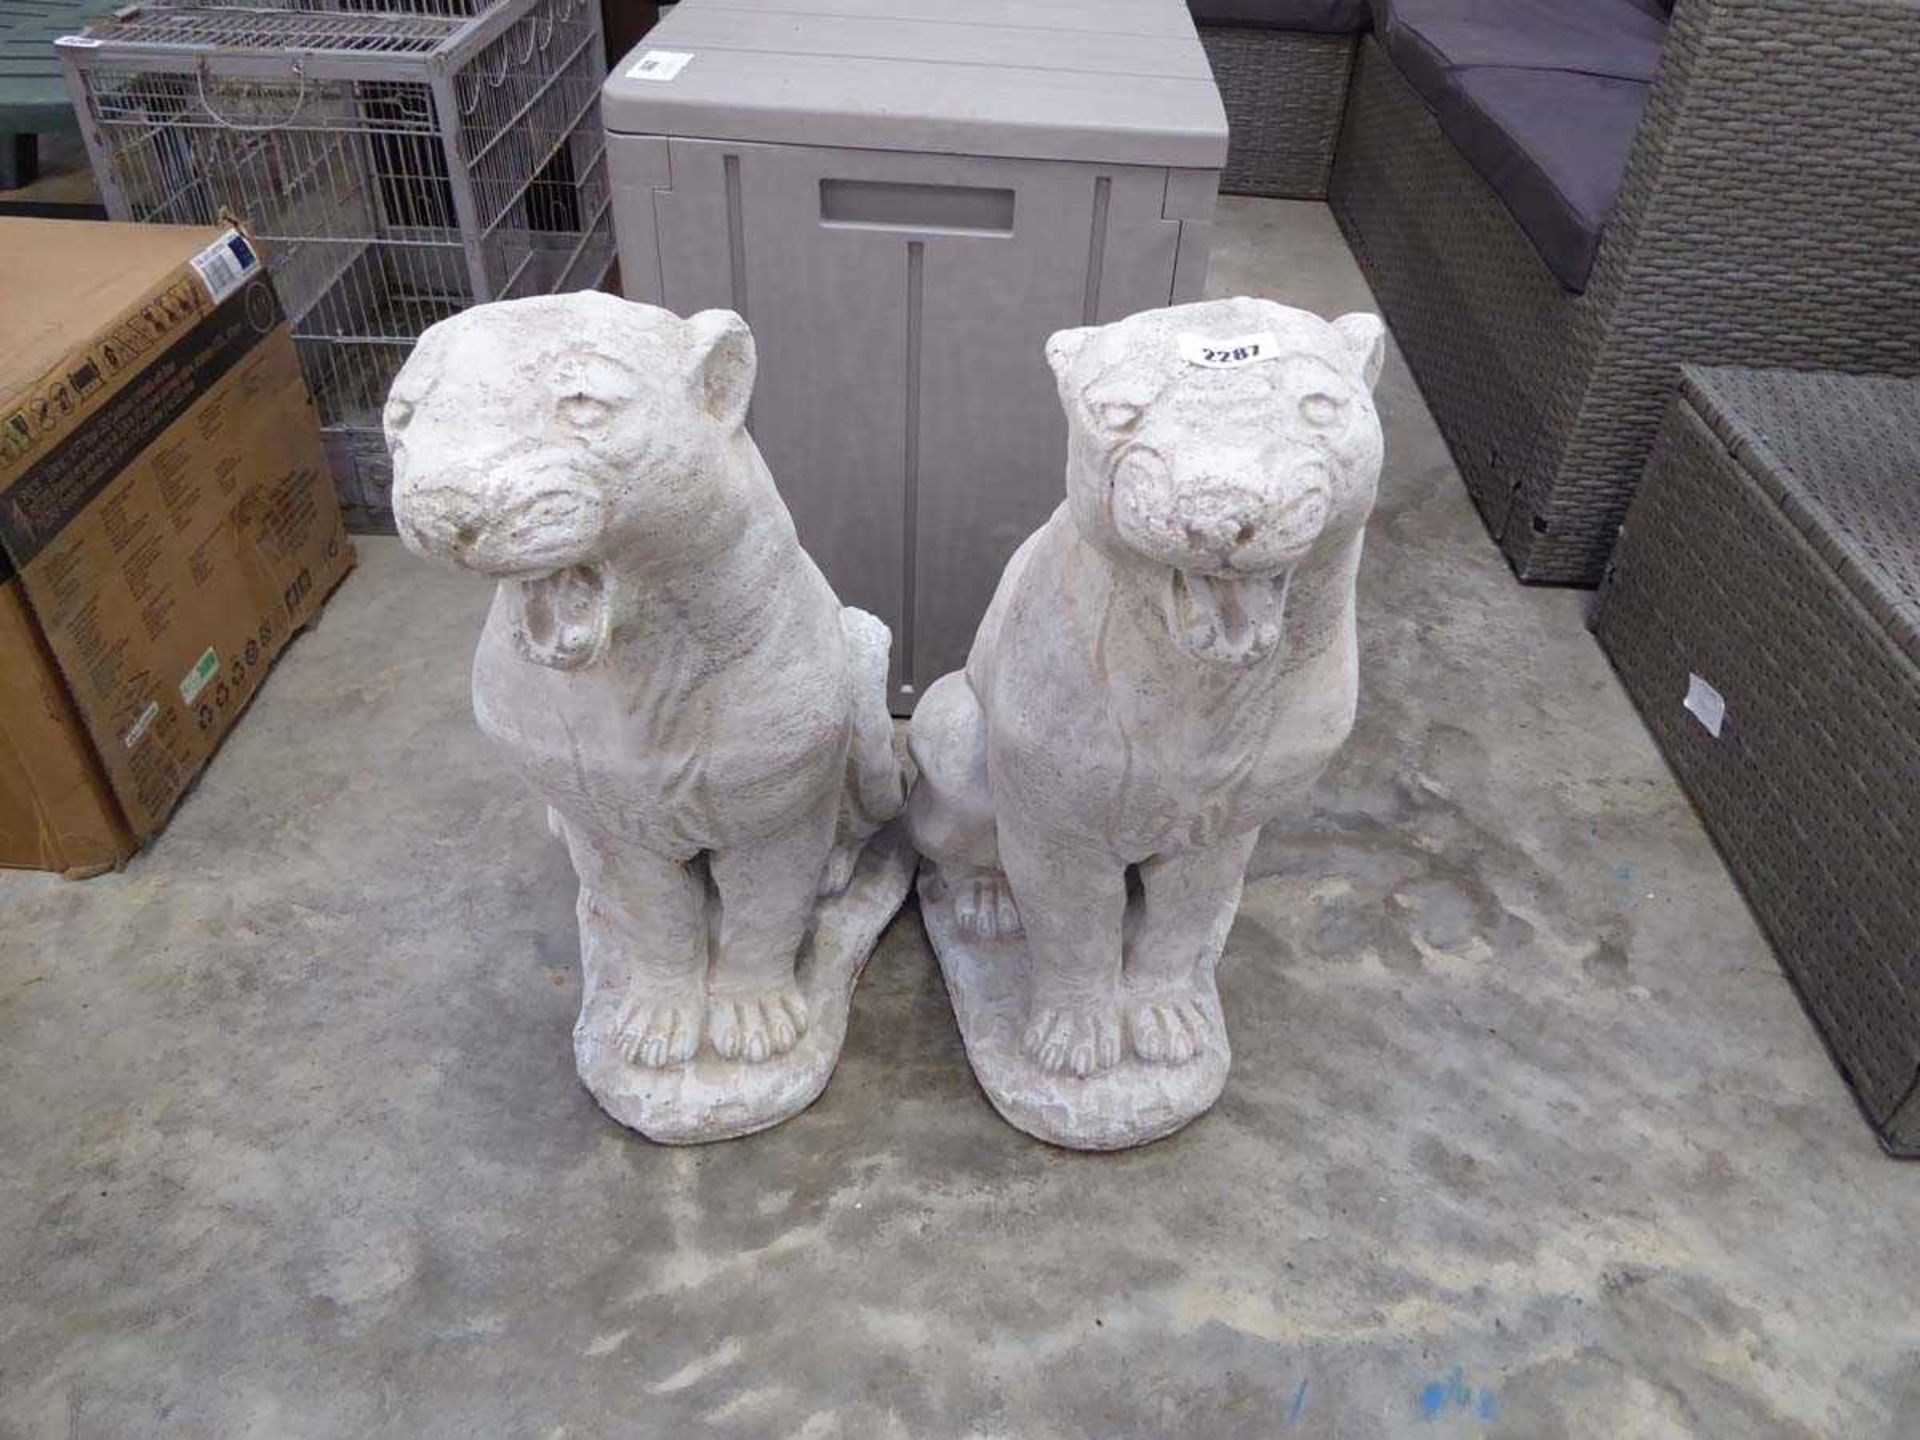 Pair of concrete panthers / Leopards